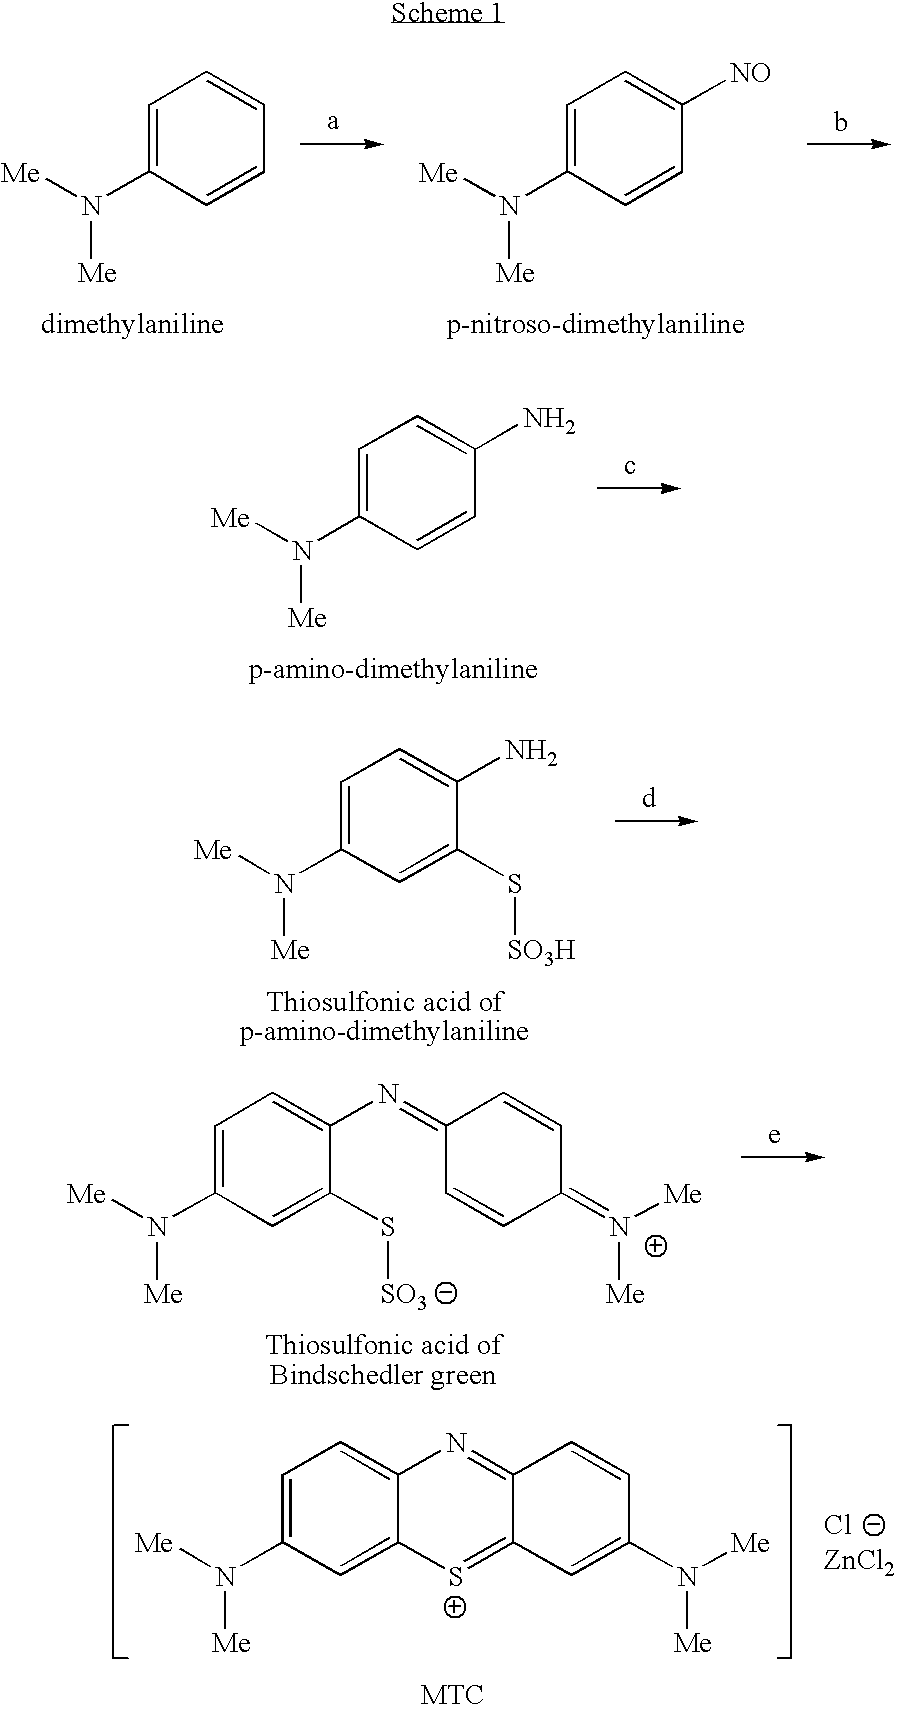 Methods of chemical synthesis and purification of diaminophenothiazinium compounds including methylthioninium chloride (MTC)